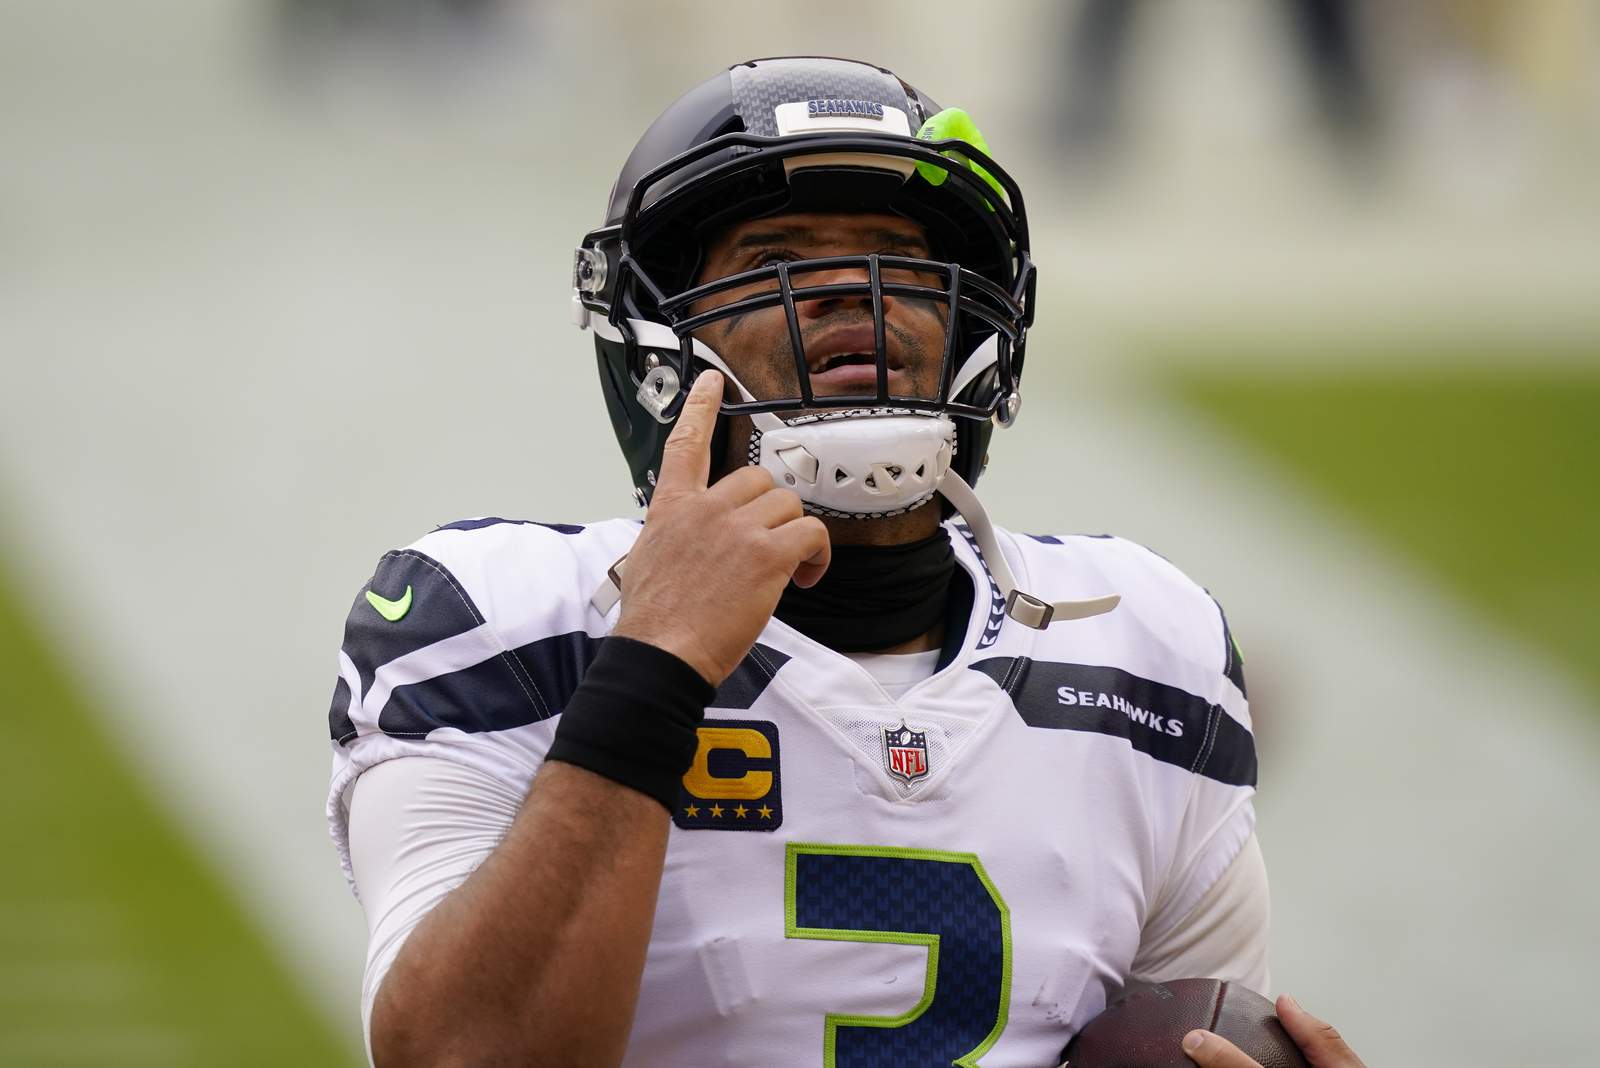 Seahawks hold on to beat Washington, clinch playoff spot